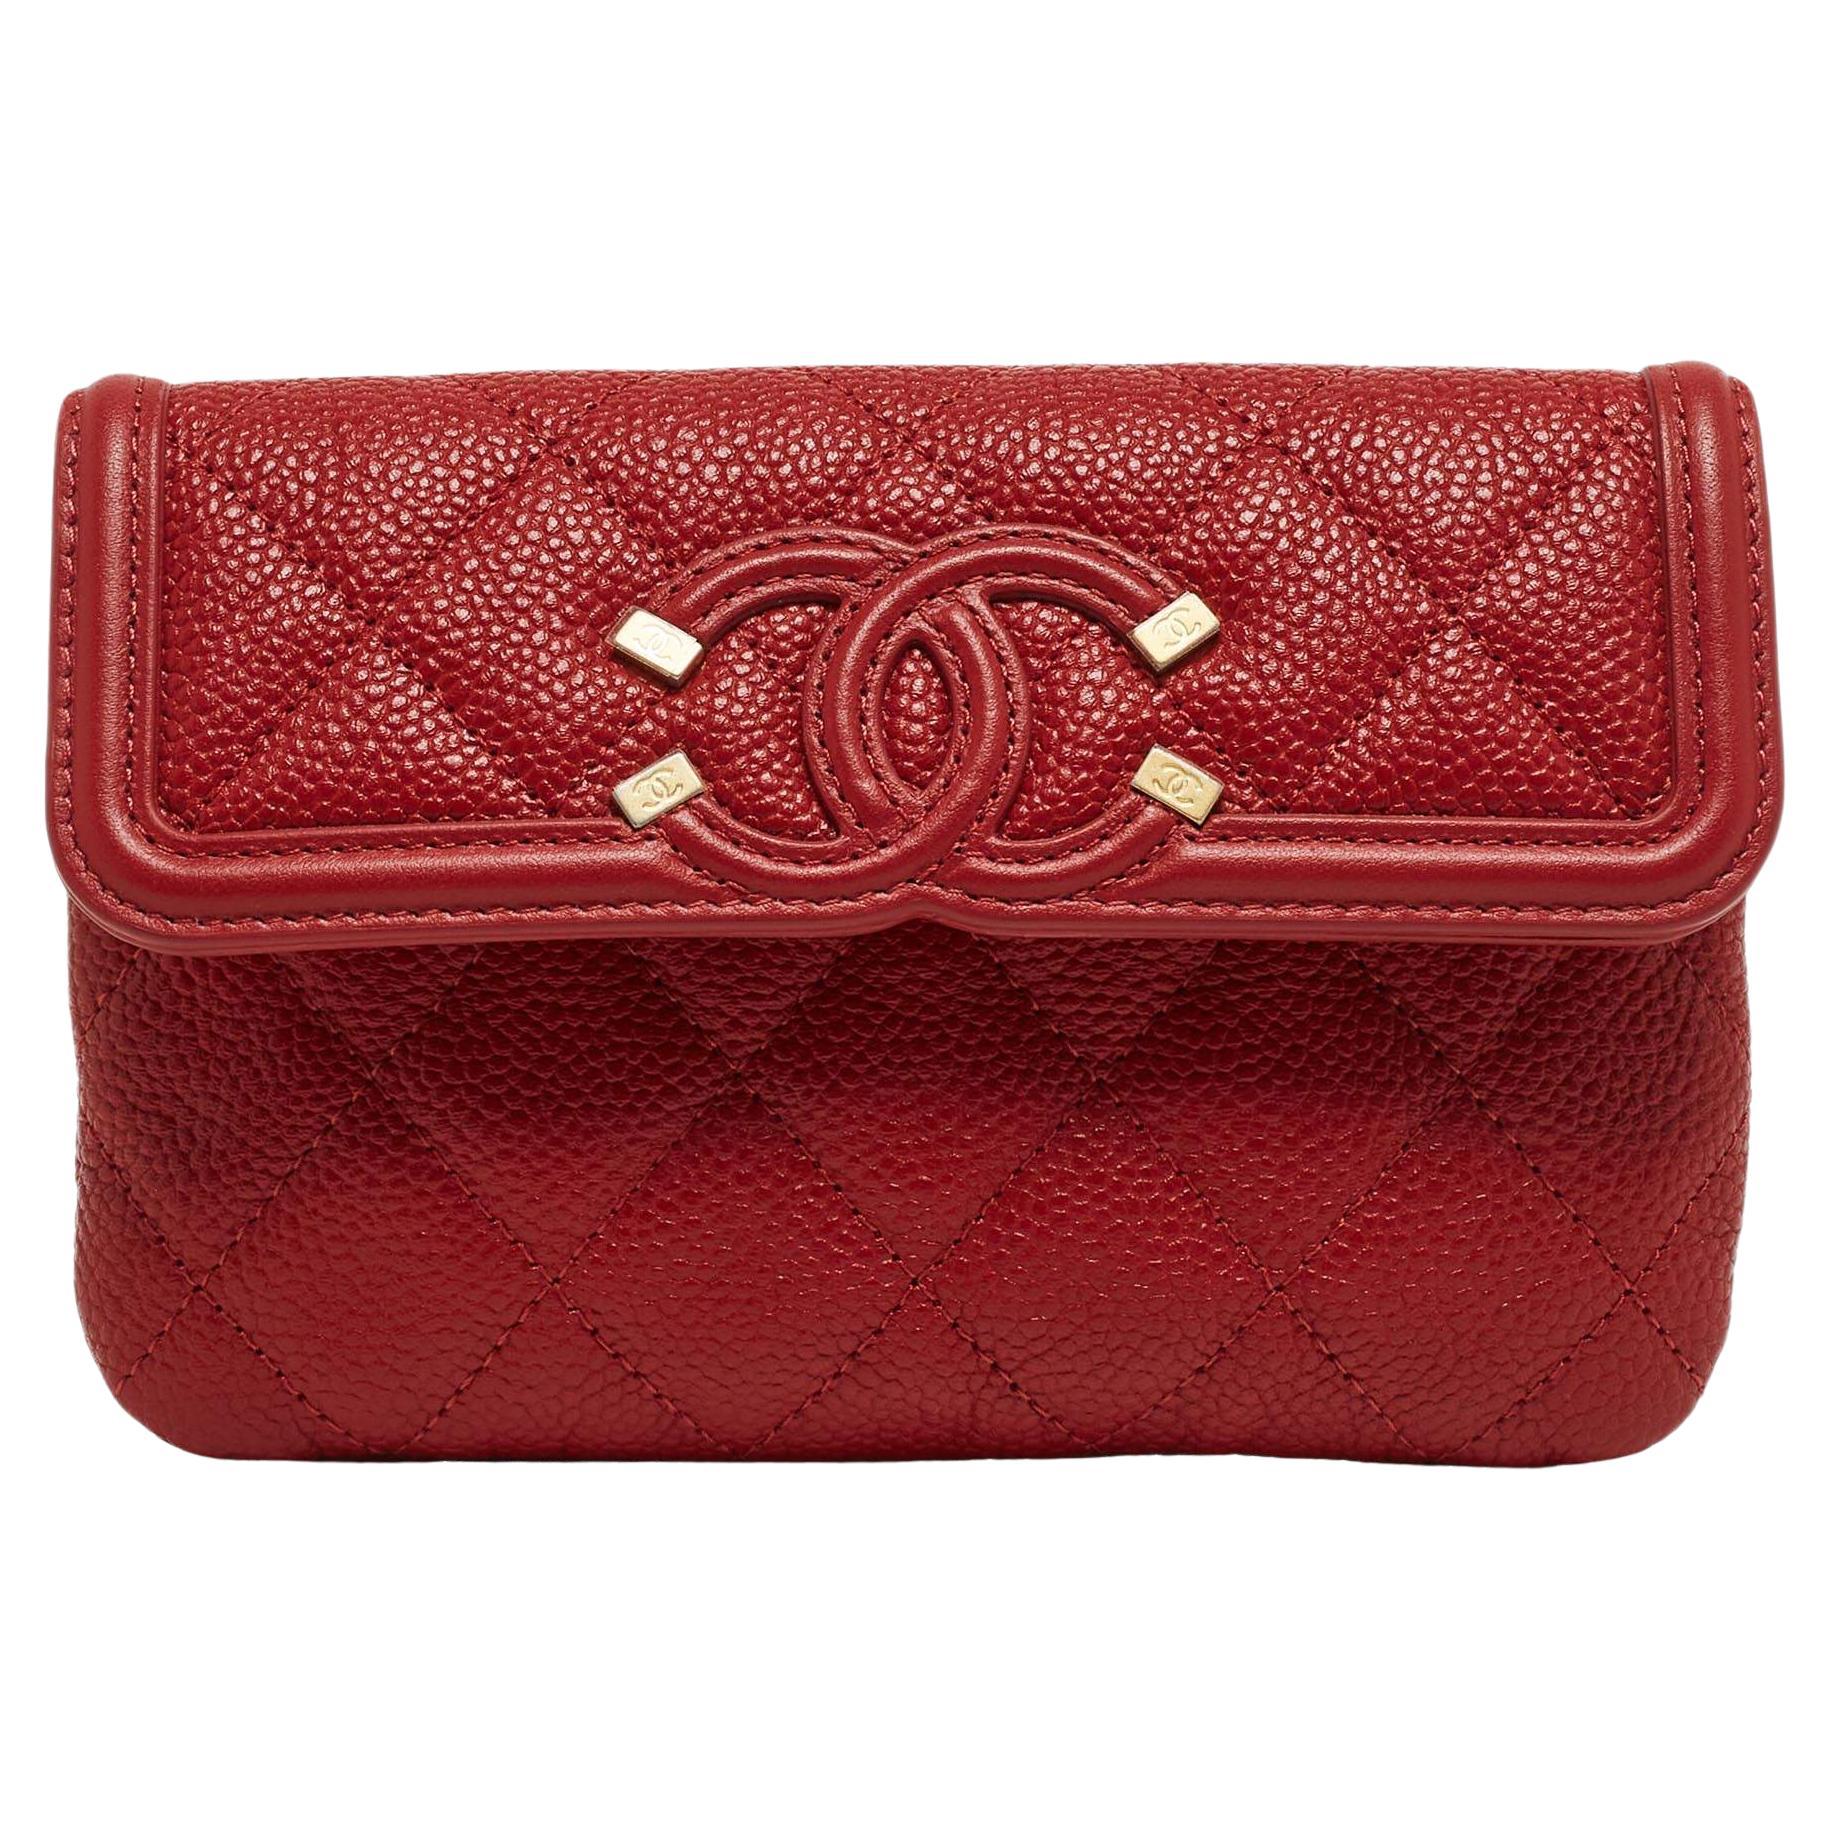 Chanel Red Quilted Caviar Leather Filigree Wallet For Sale